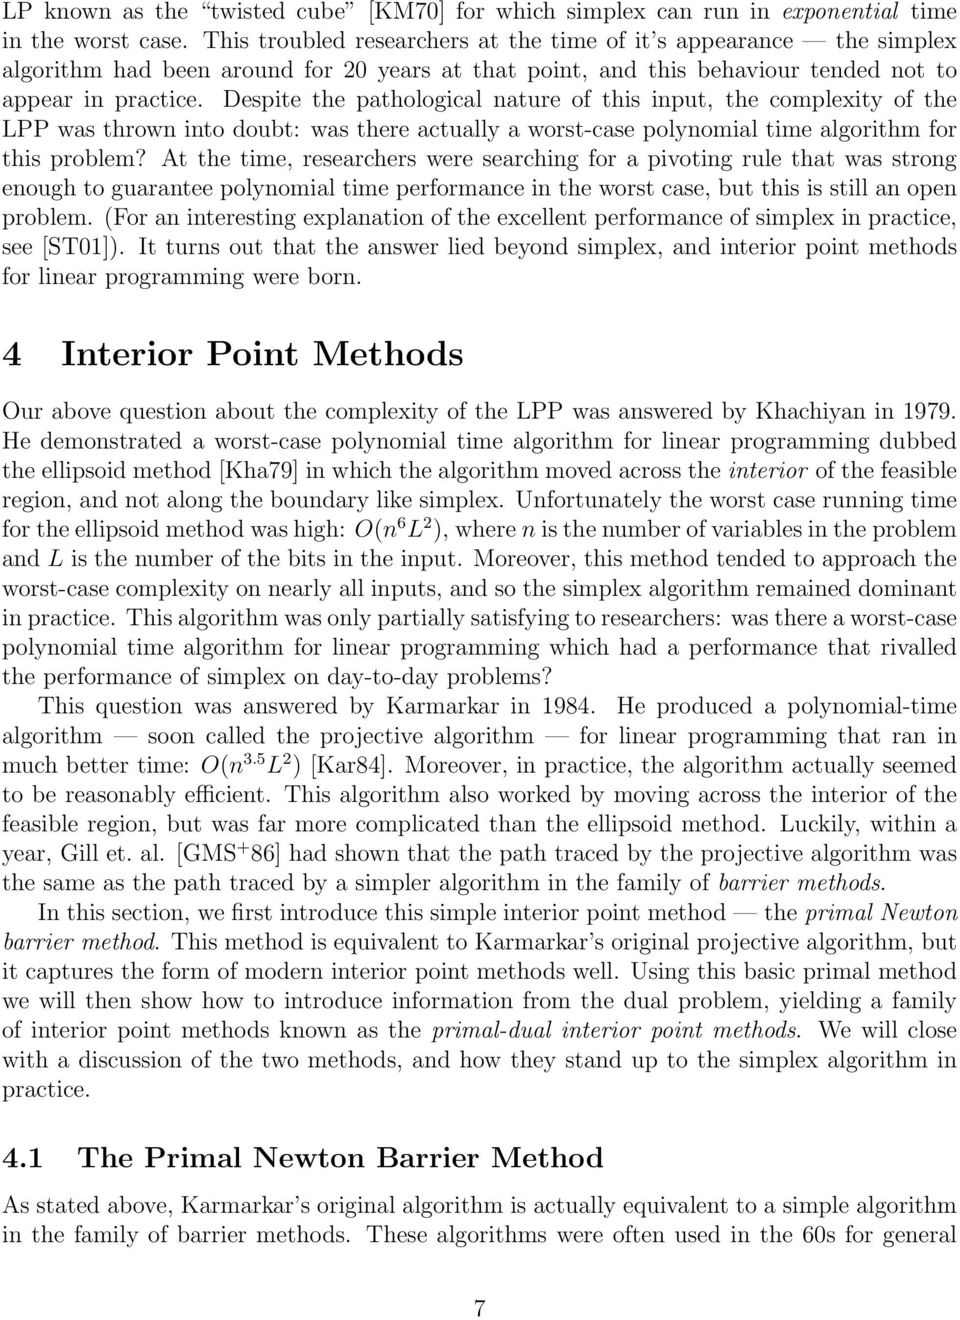 Despite the pathological nature of this input, the complexity of the LPP was thrown into doubt: was there actually a worst-case polynomial time algorithm for this problem?